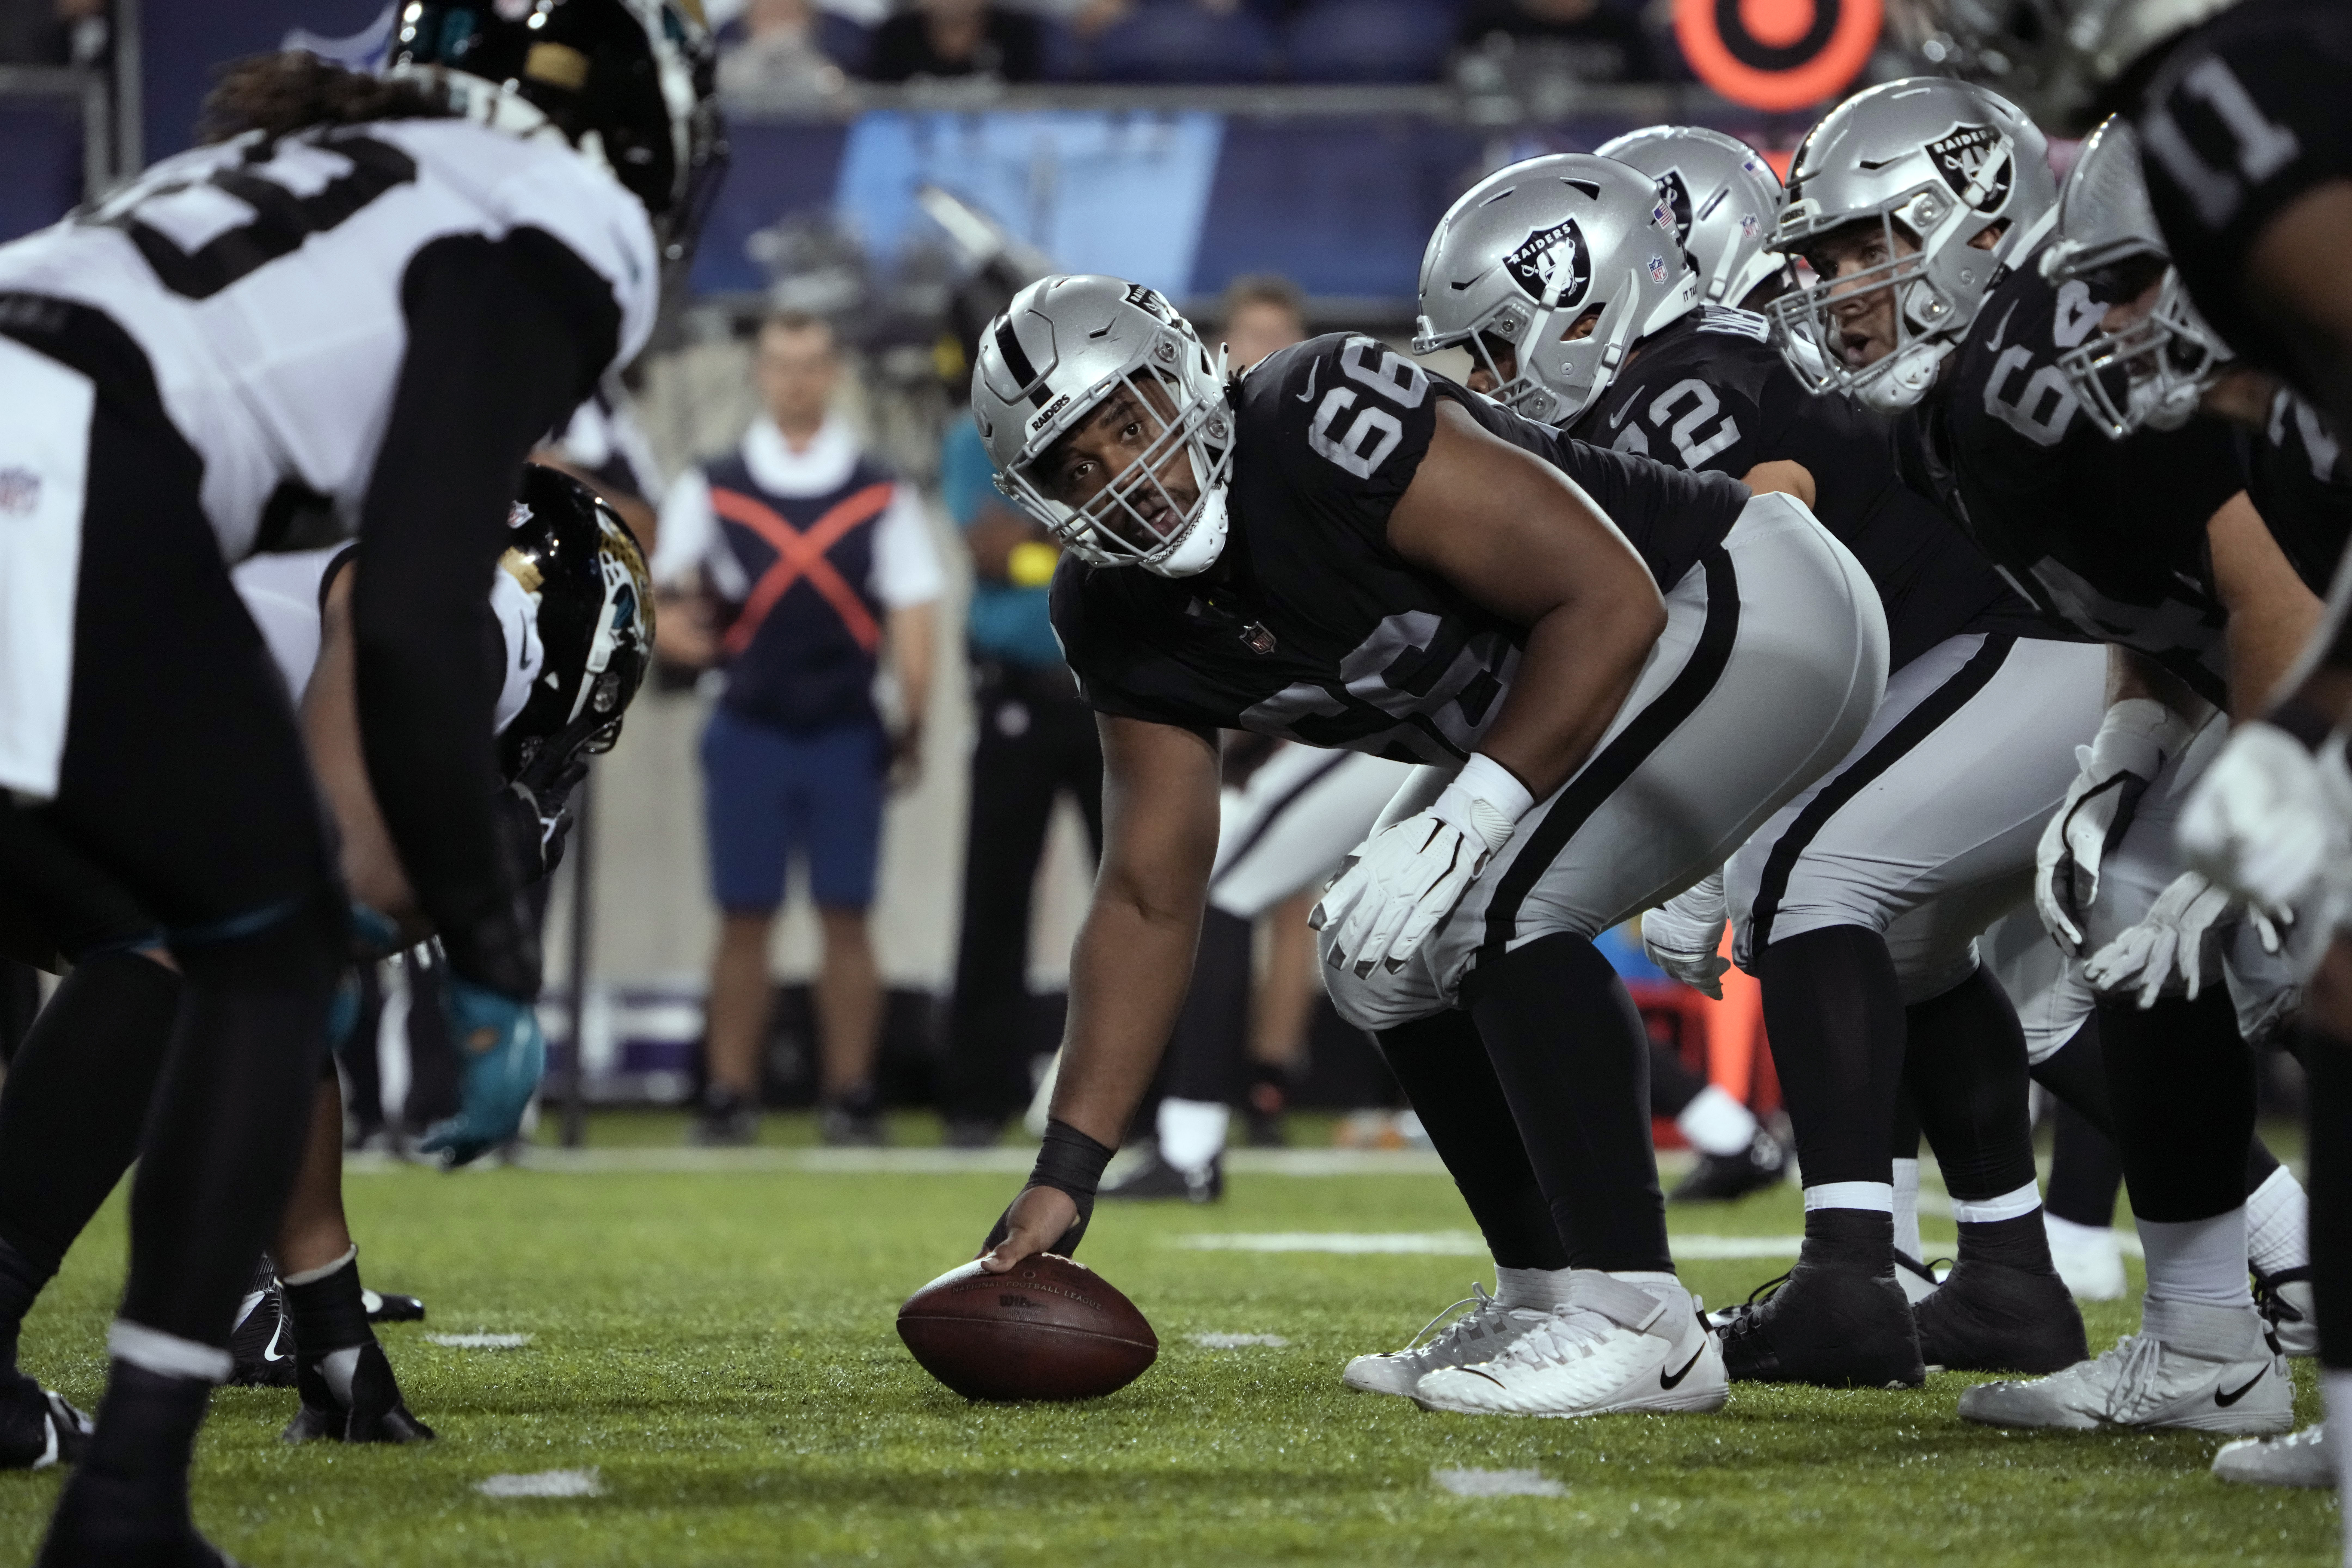 Raiders rookie Dylan Parham running 1st team at center for injured Andre James